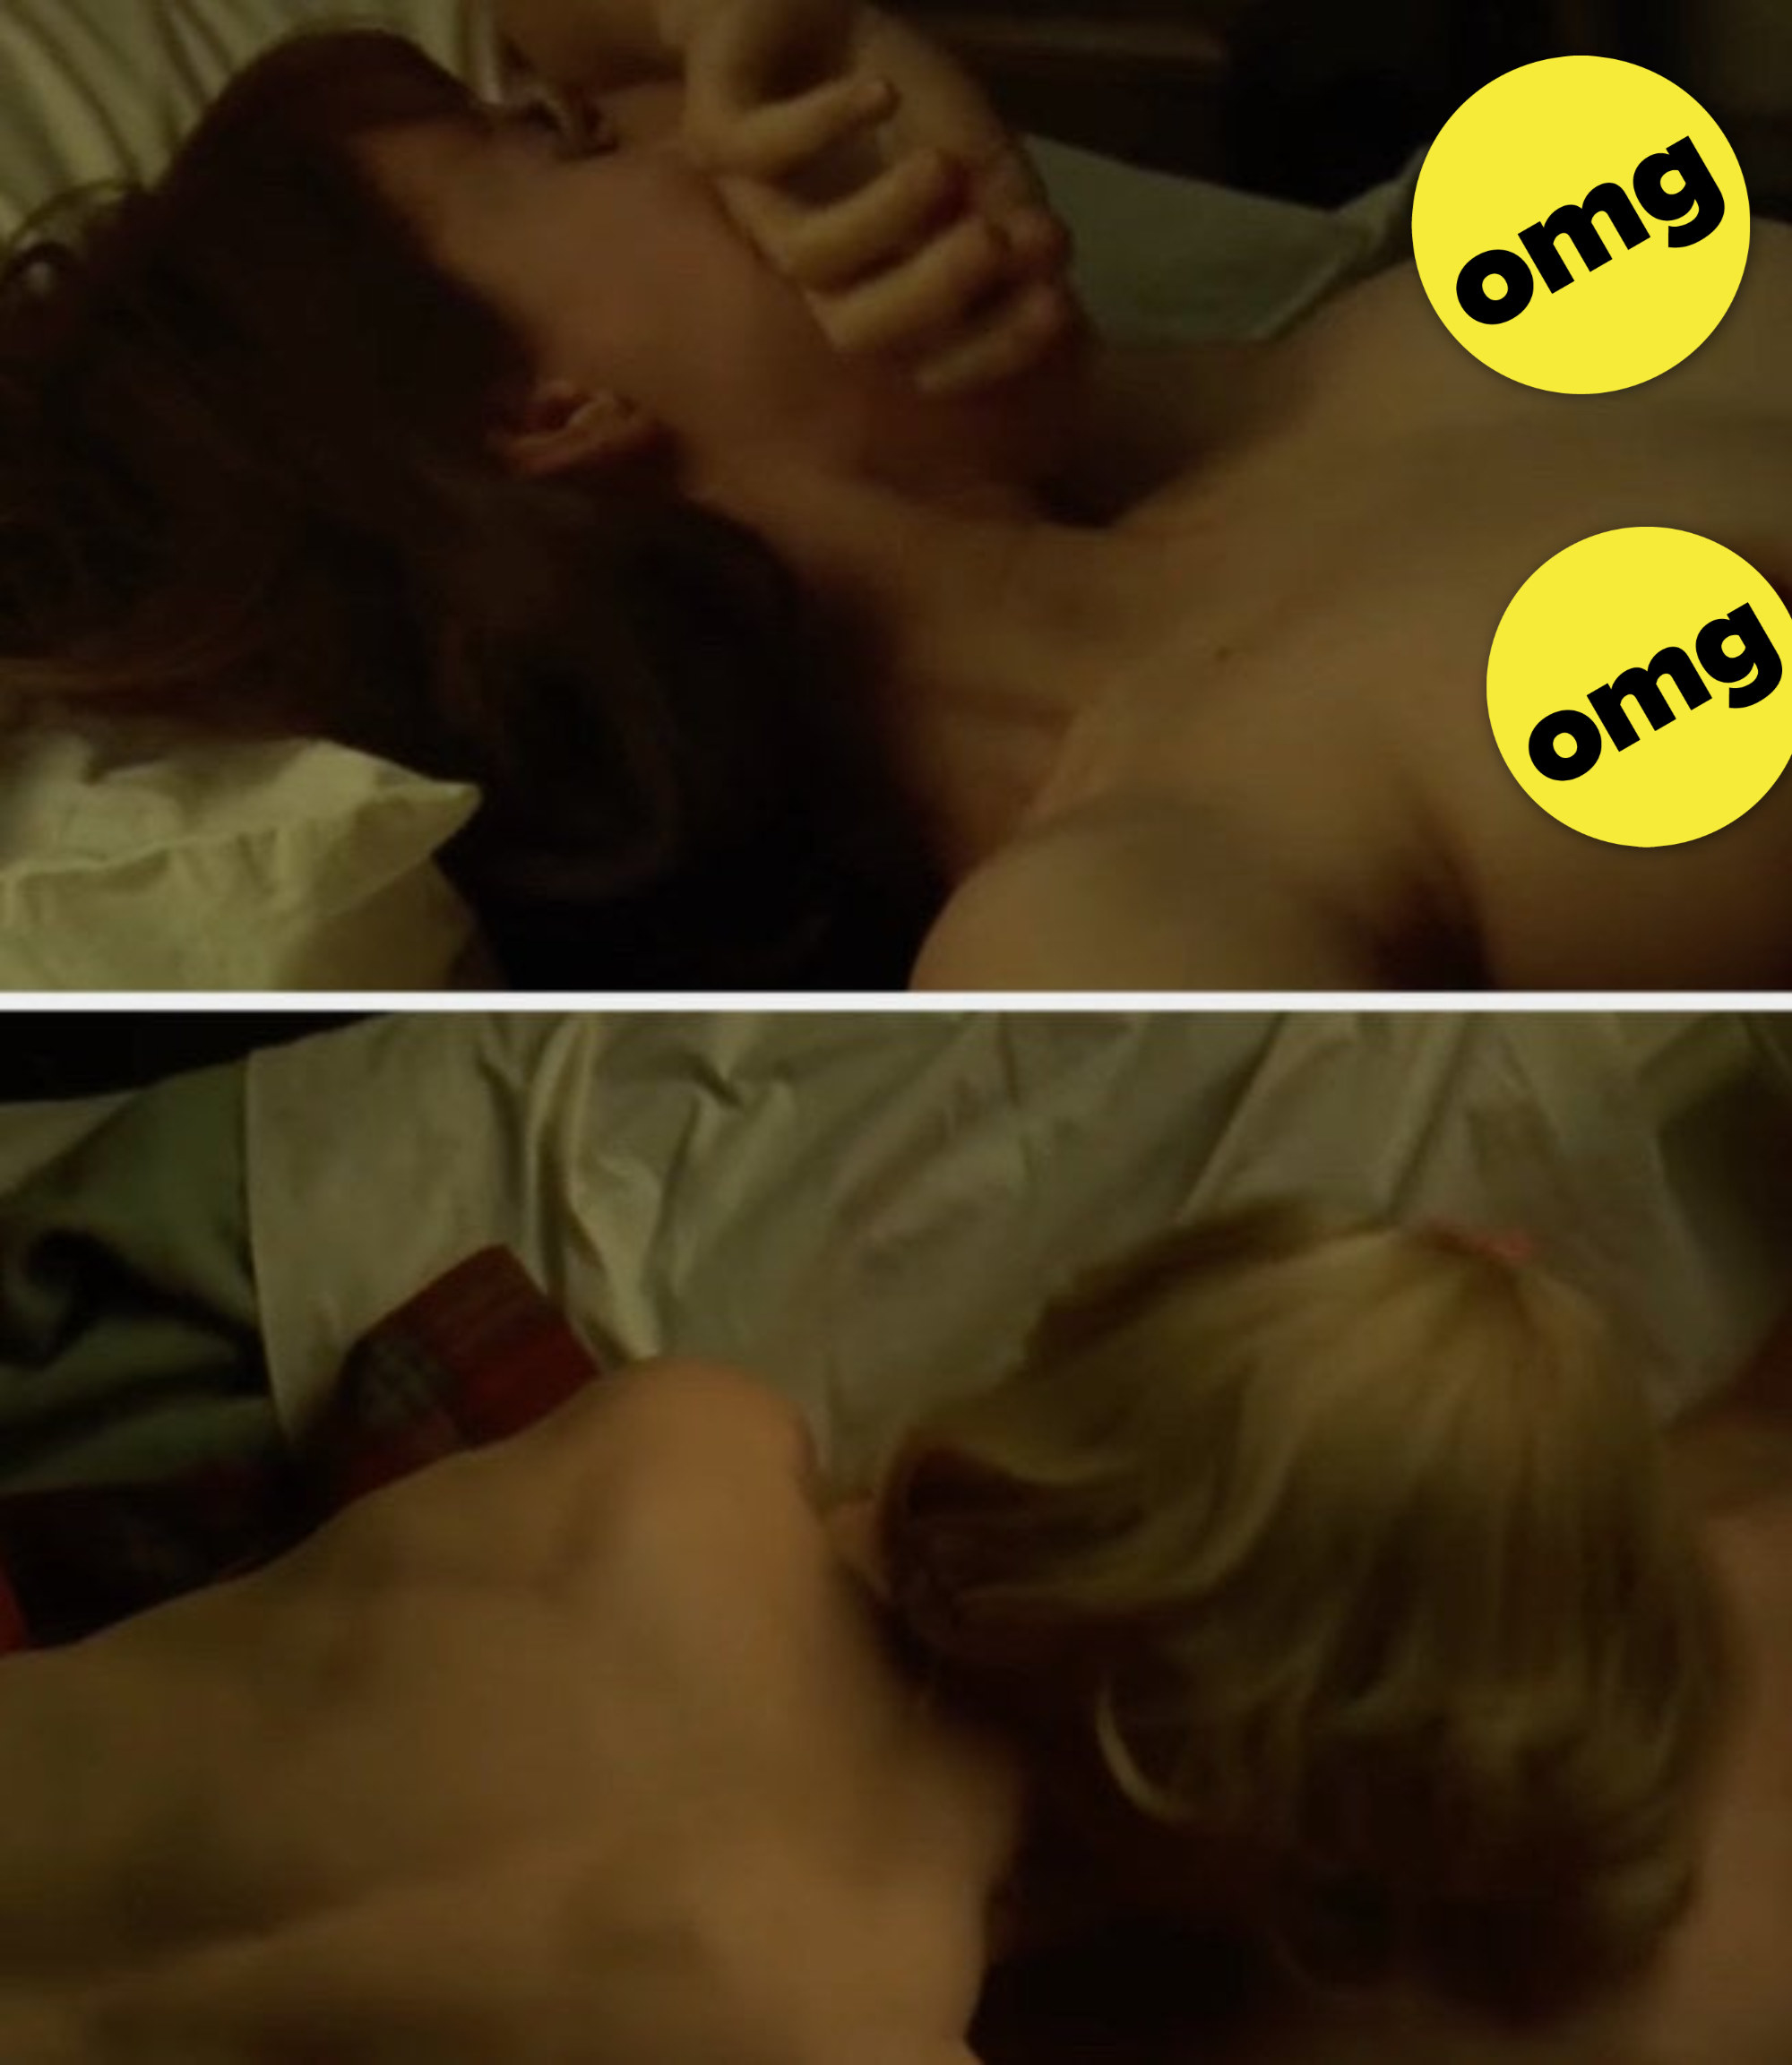 Rooney Mara and Cate Blanchett in a sex scene in &quot;Carol&quot;